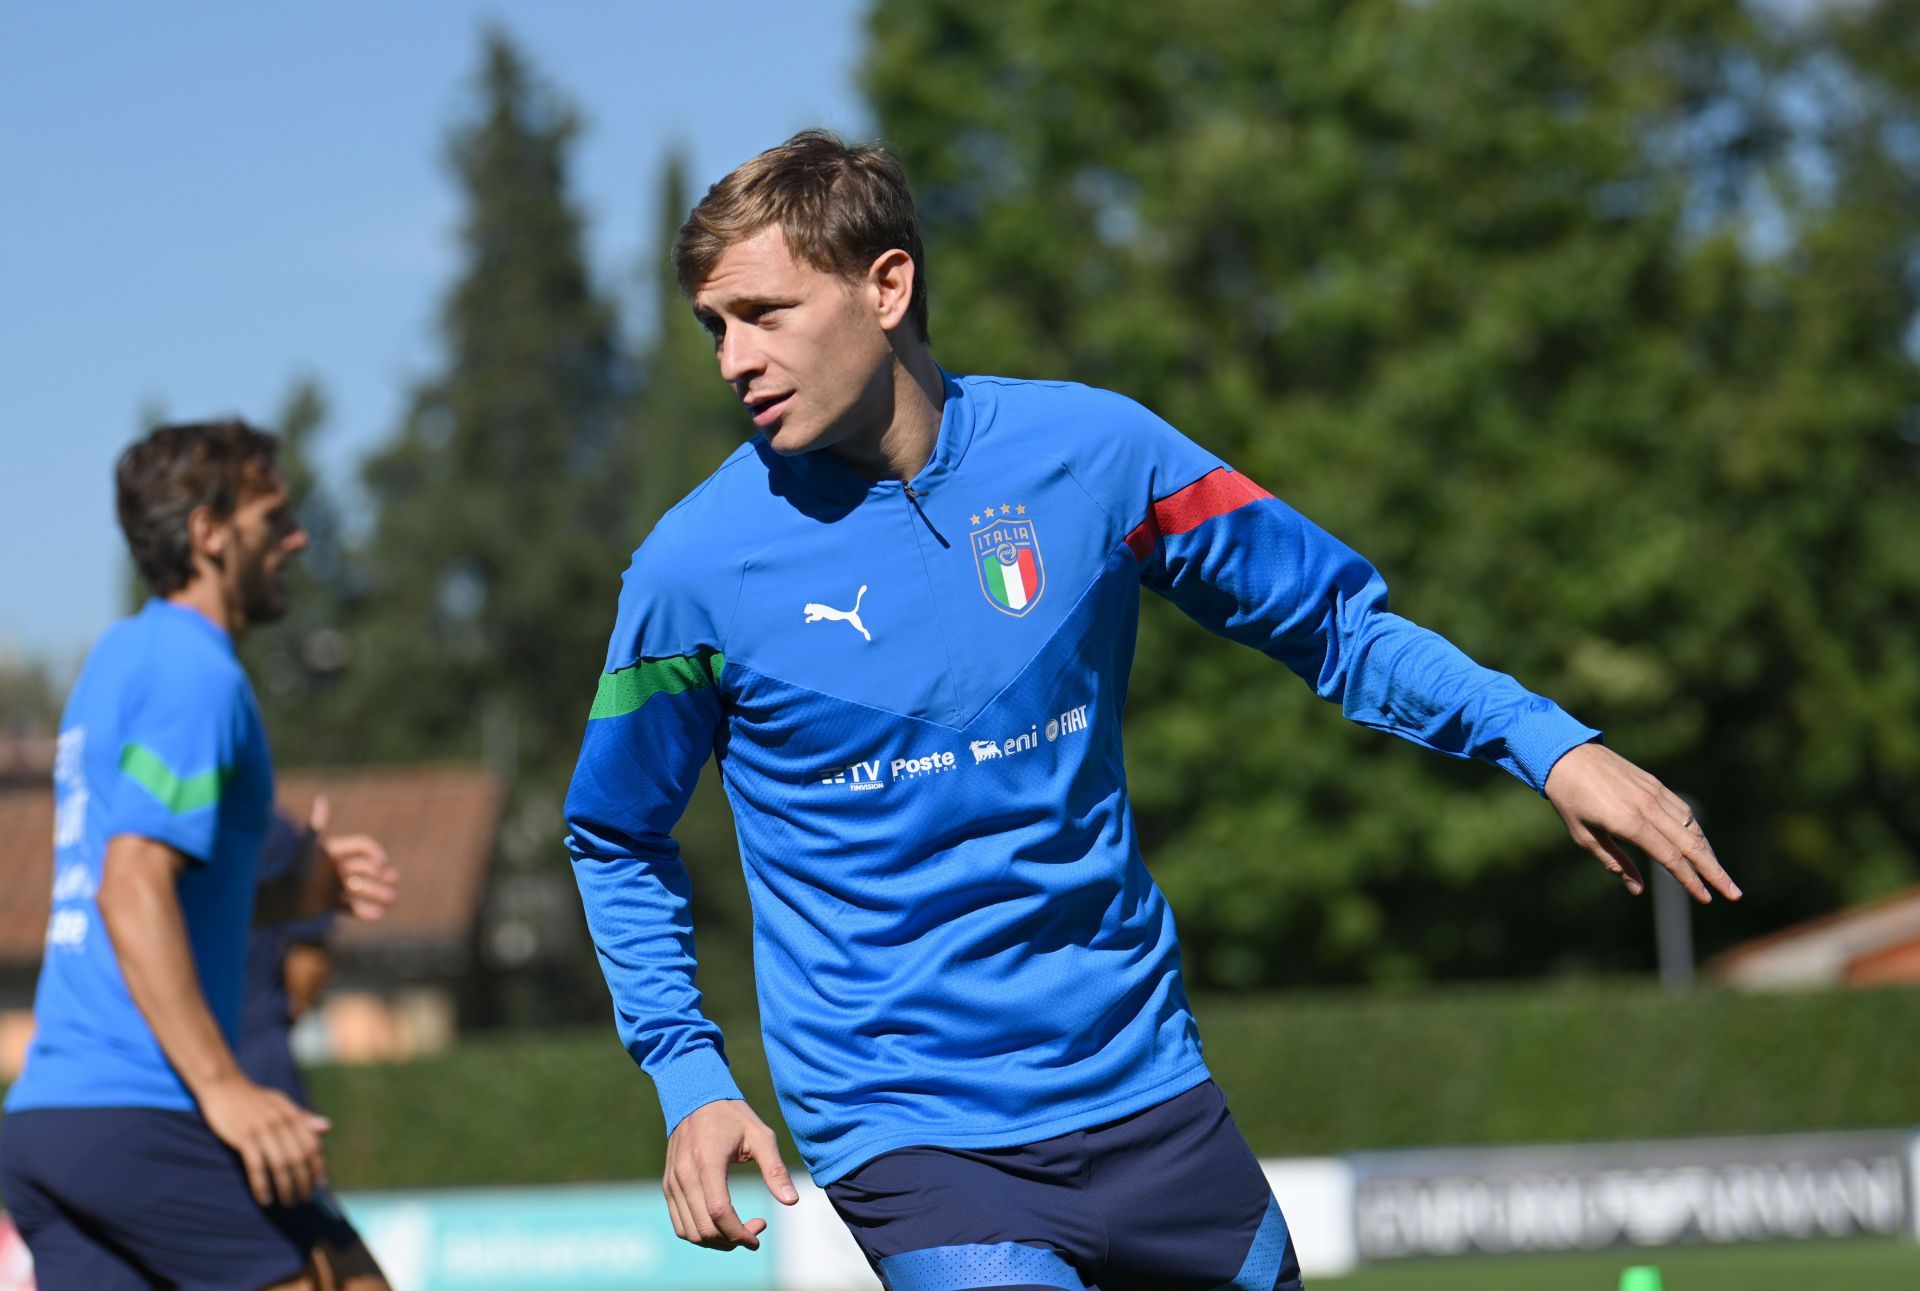 Barella is excelling for both Inter and the Italy national team